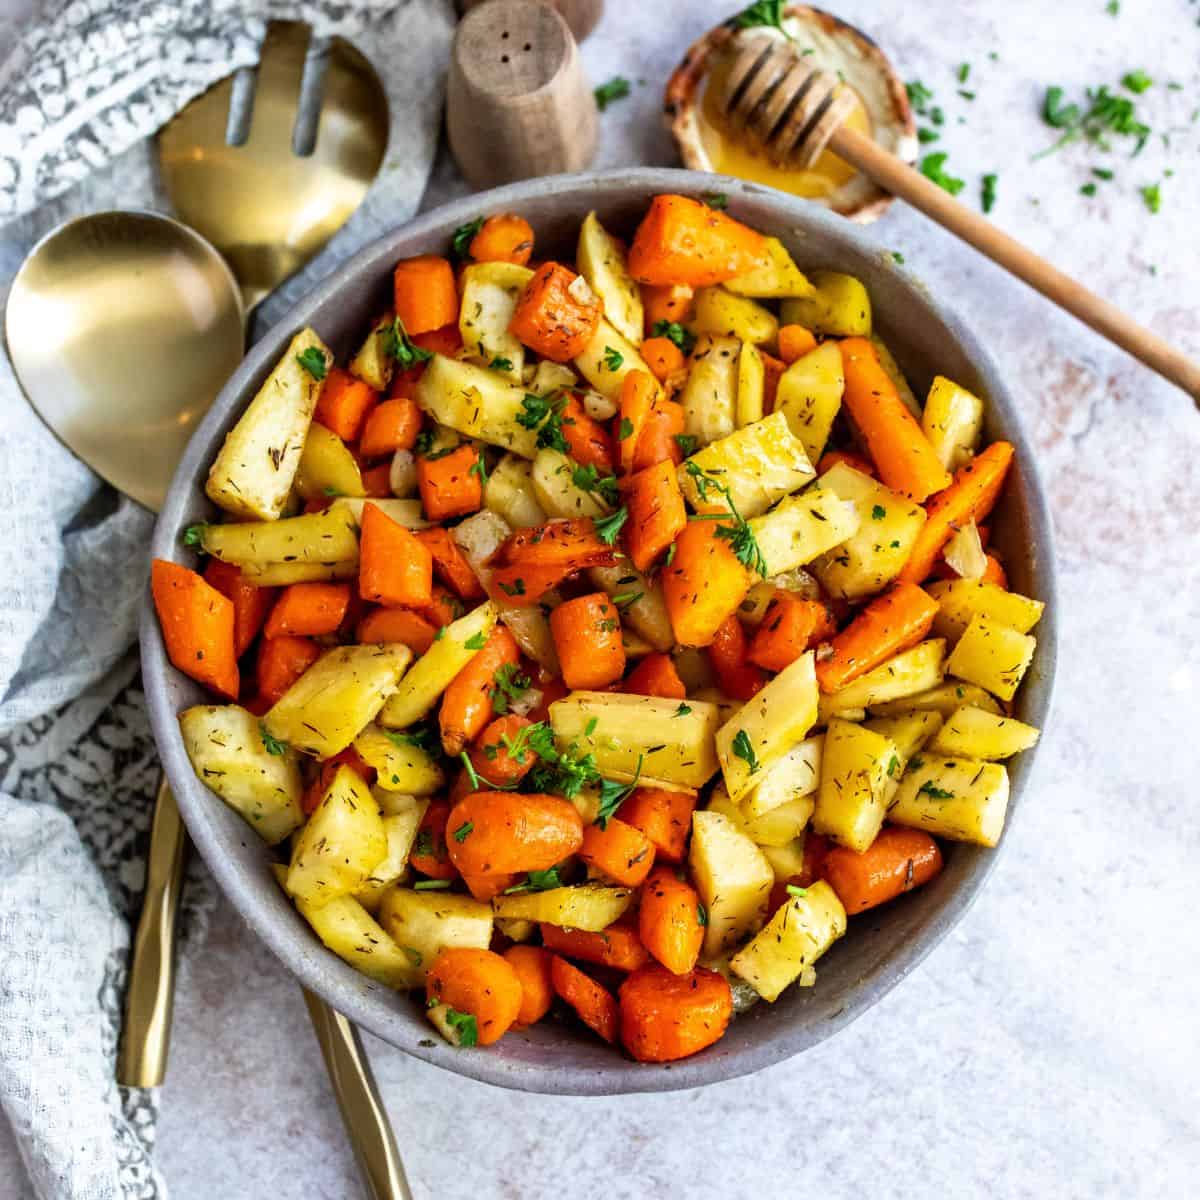 Grey pottery bowl with roasted carrots and parsnips and honey on the side.